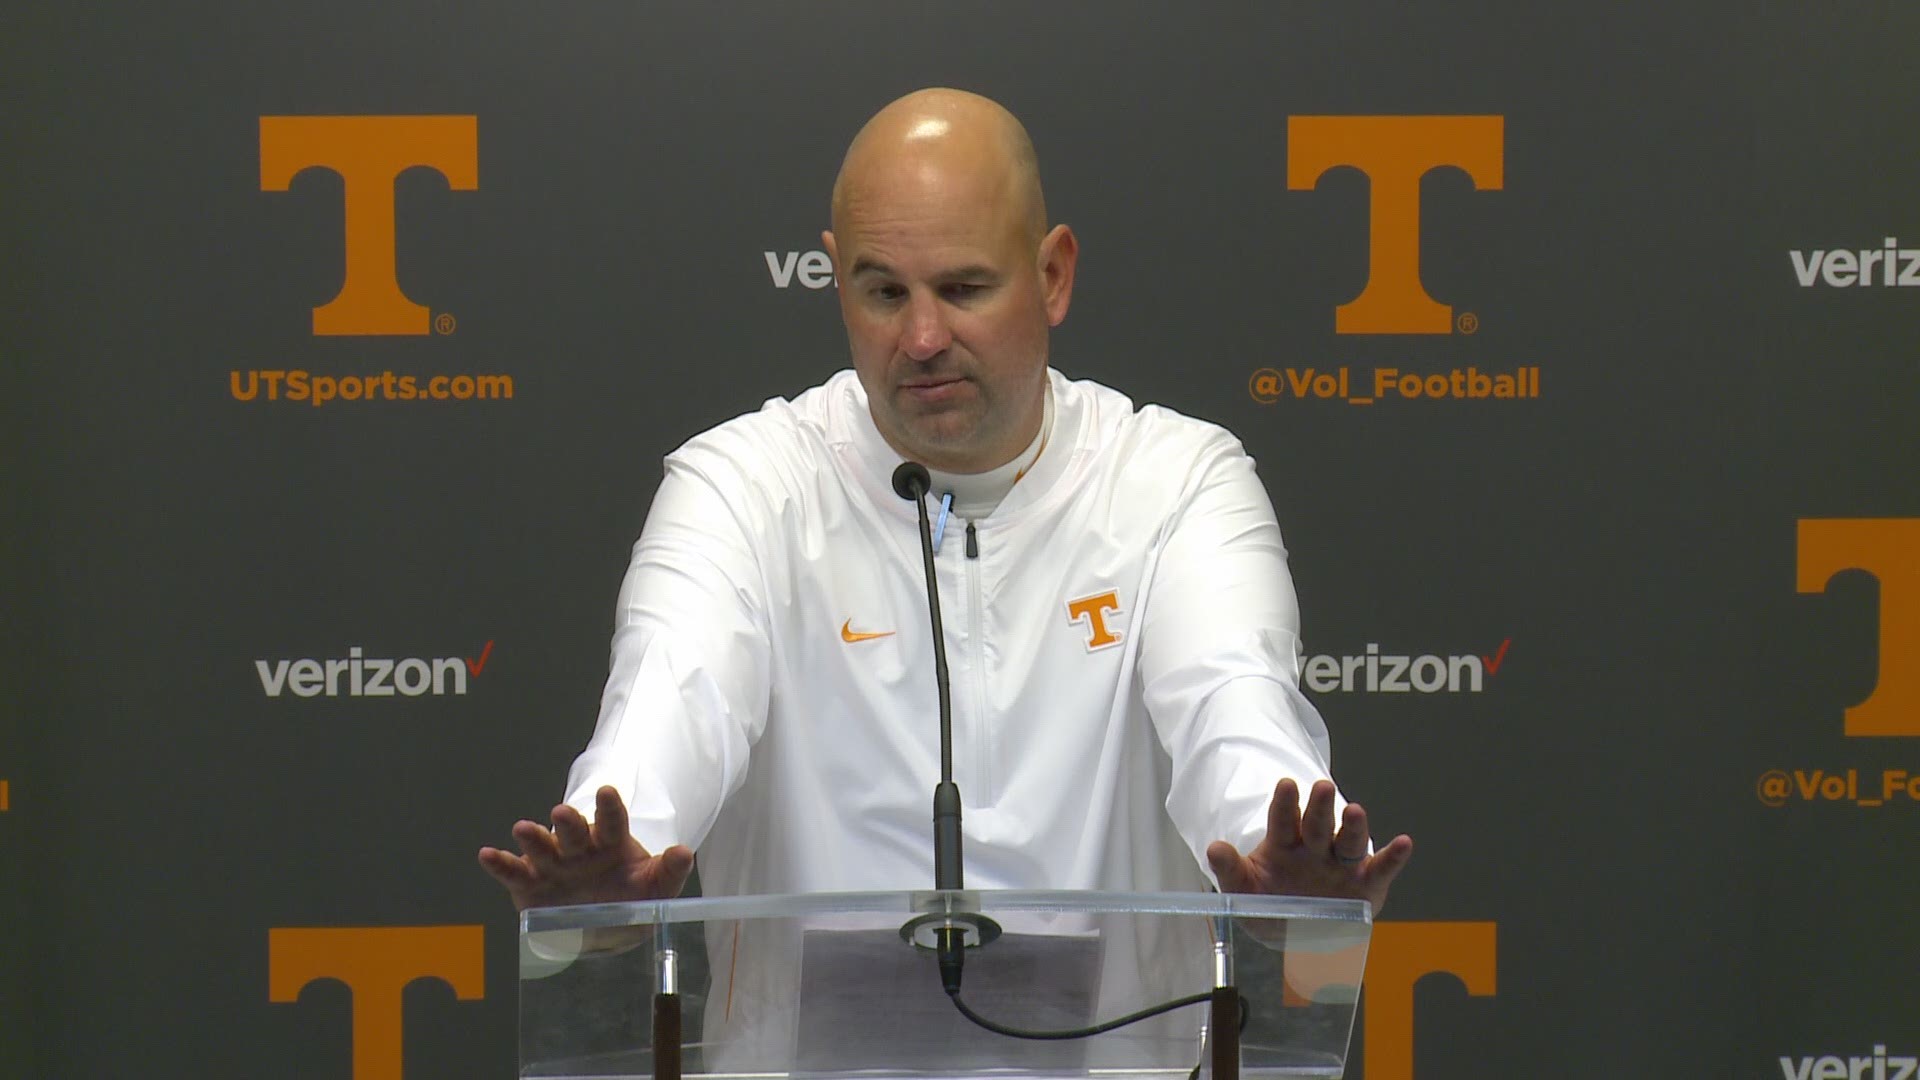 After beating Kentucky, Pruitt says the Vols have expectations to make the postseason.